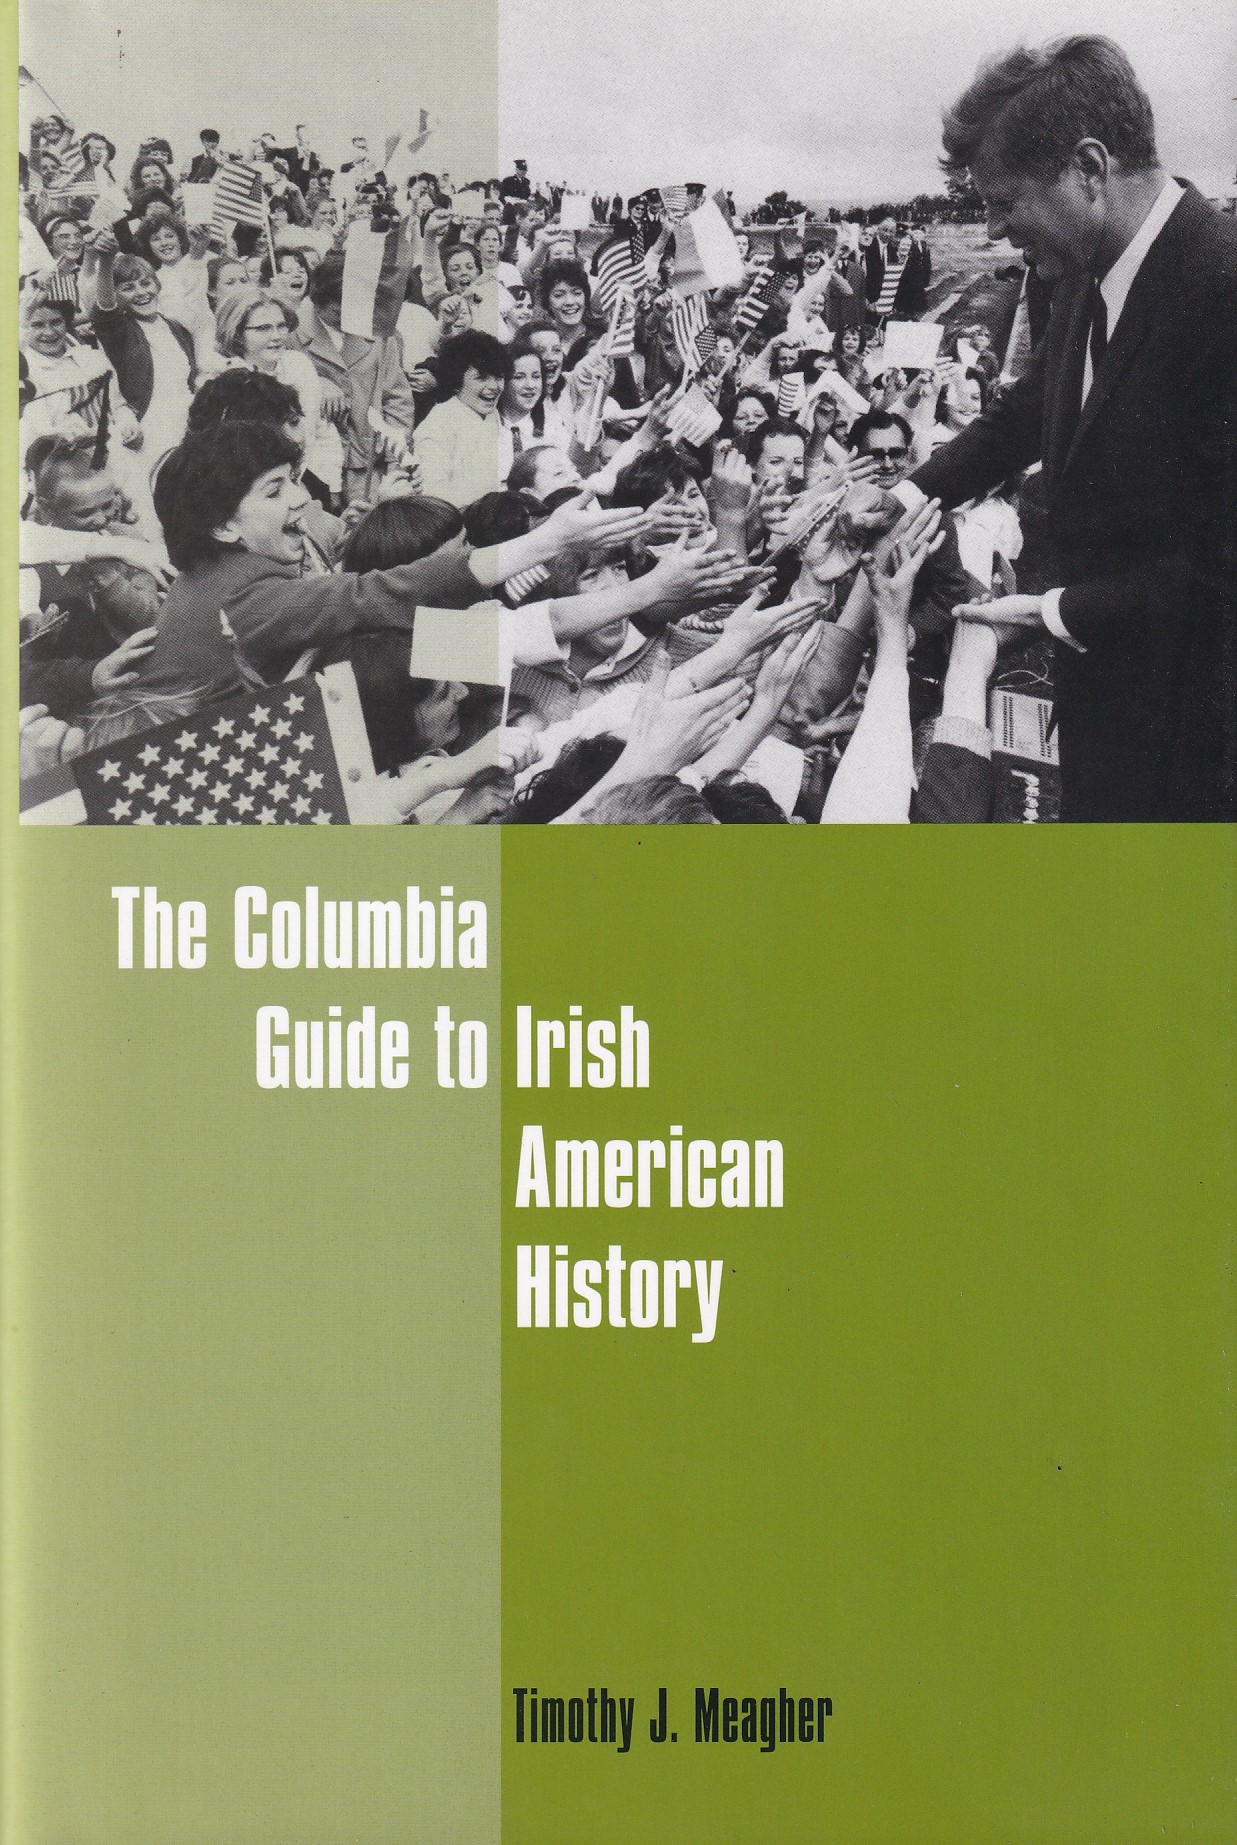 The Columbia Guide to Irish American History | Meagher, Timothy | Charlie Byrne's